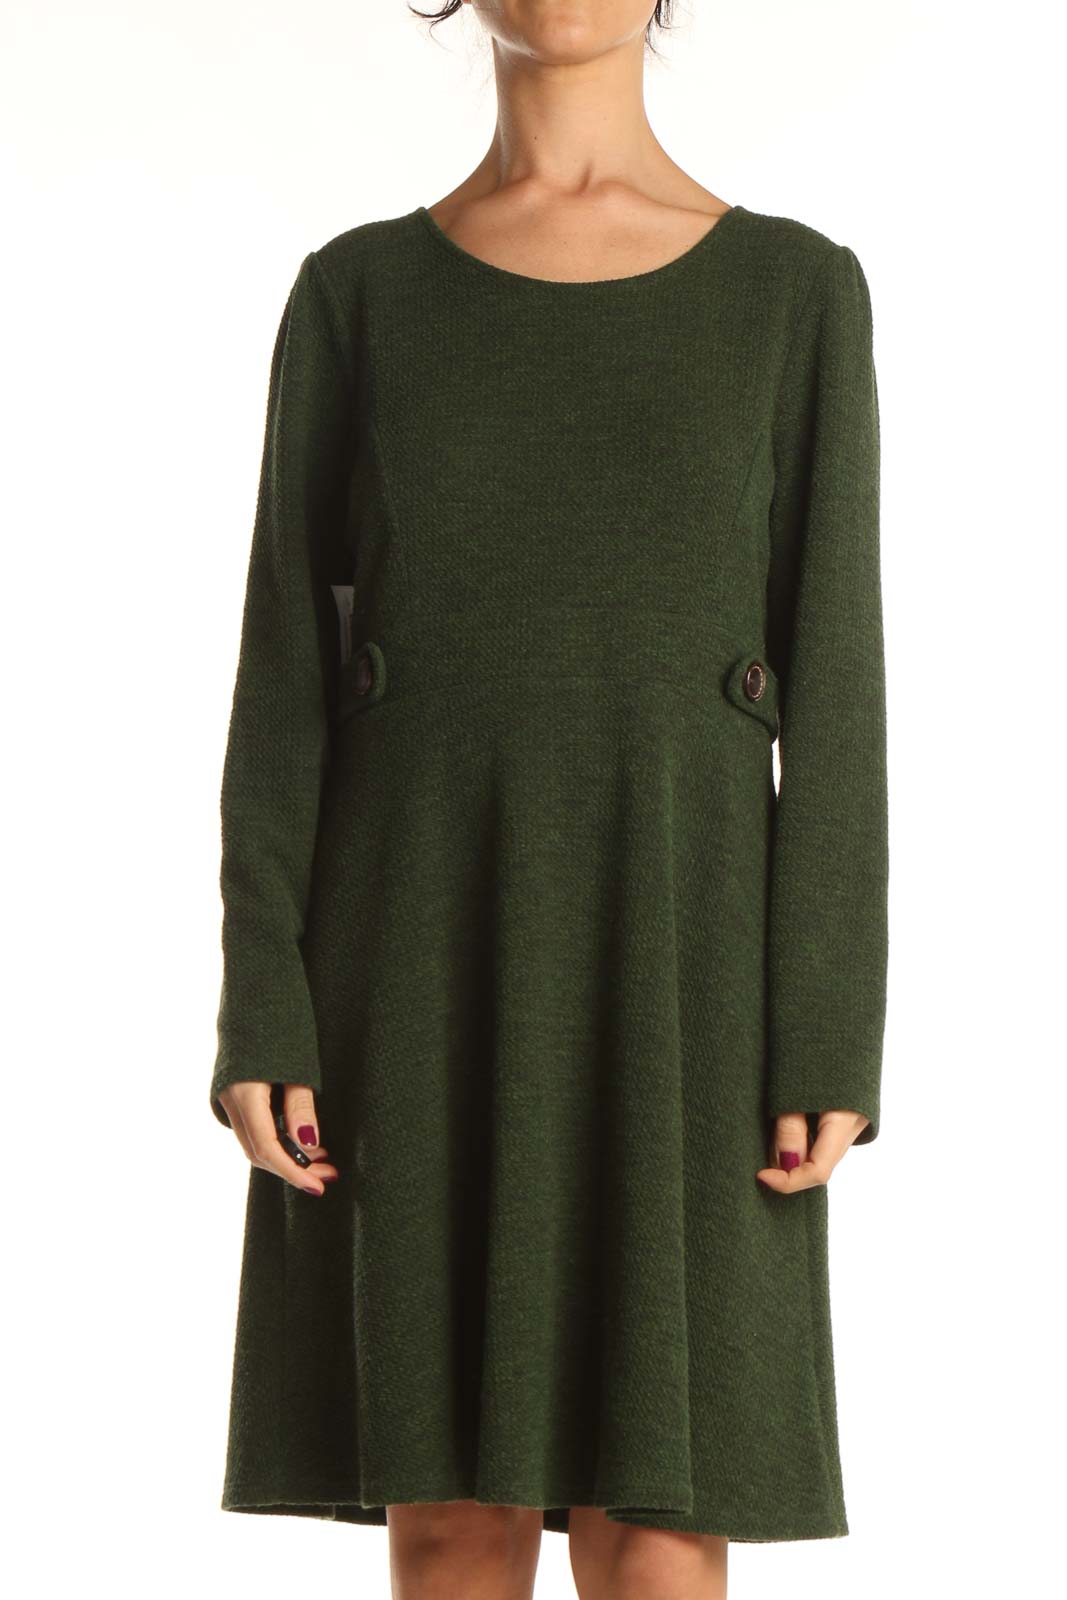 Green Sweater Classic Fit & Flare Dress Front